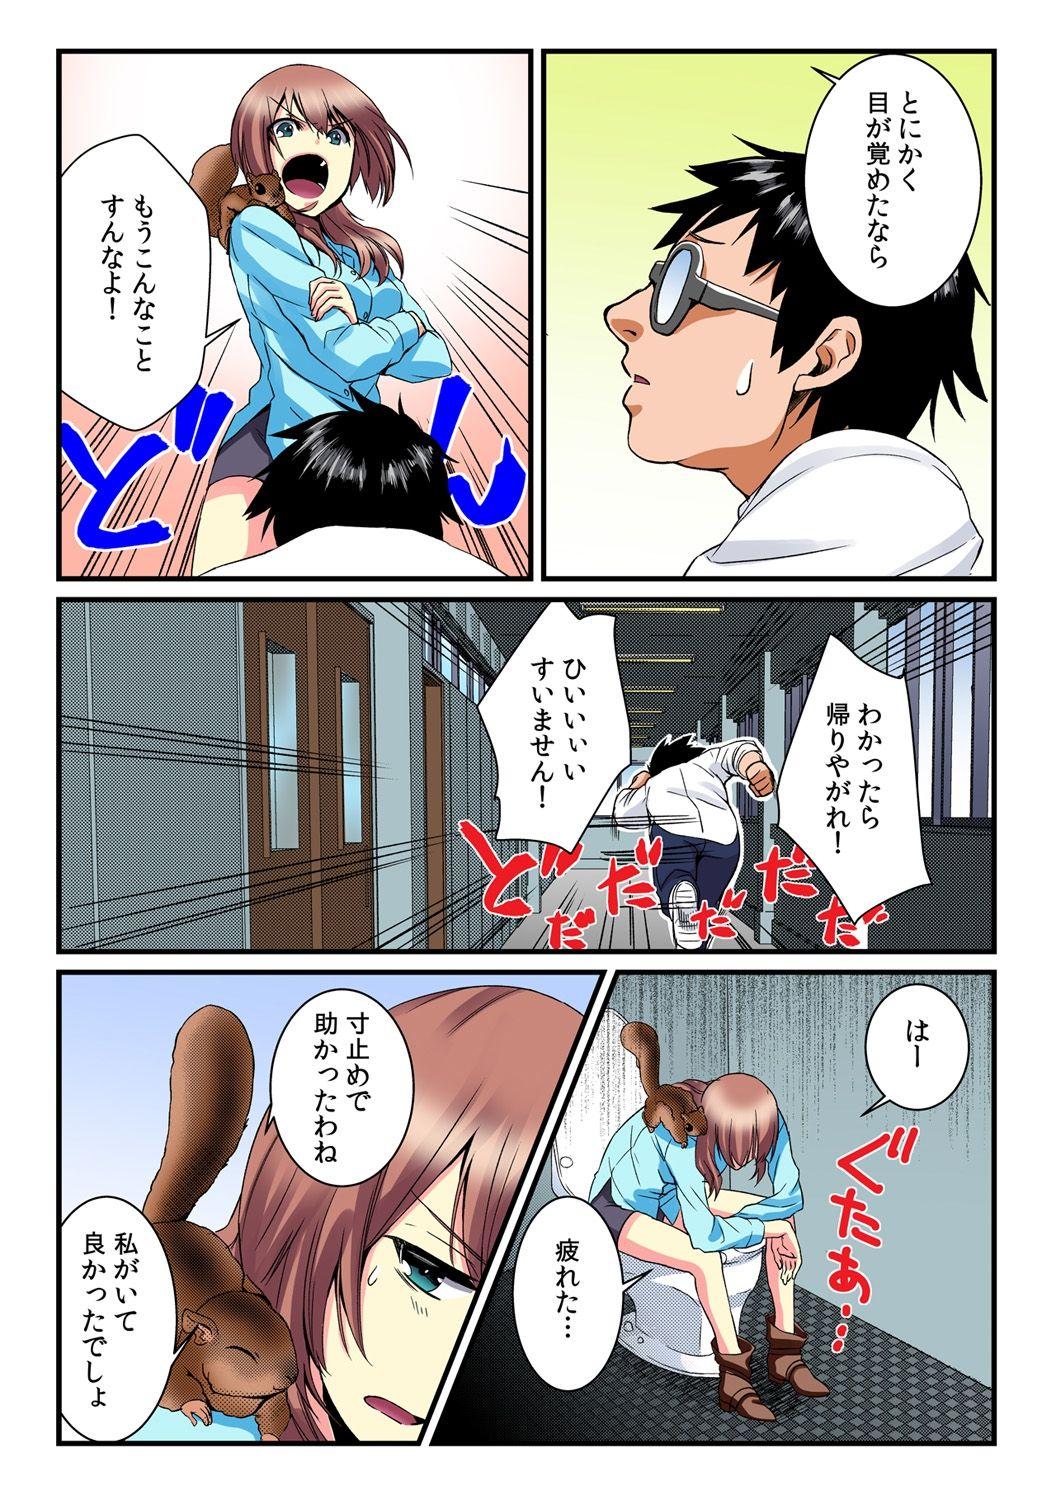 [Akagi Gijou / Akahige] I became a girl- and I definitely can't let anyone find out! (Full color) 2 29